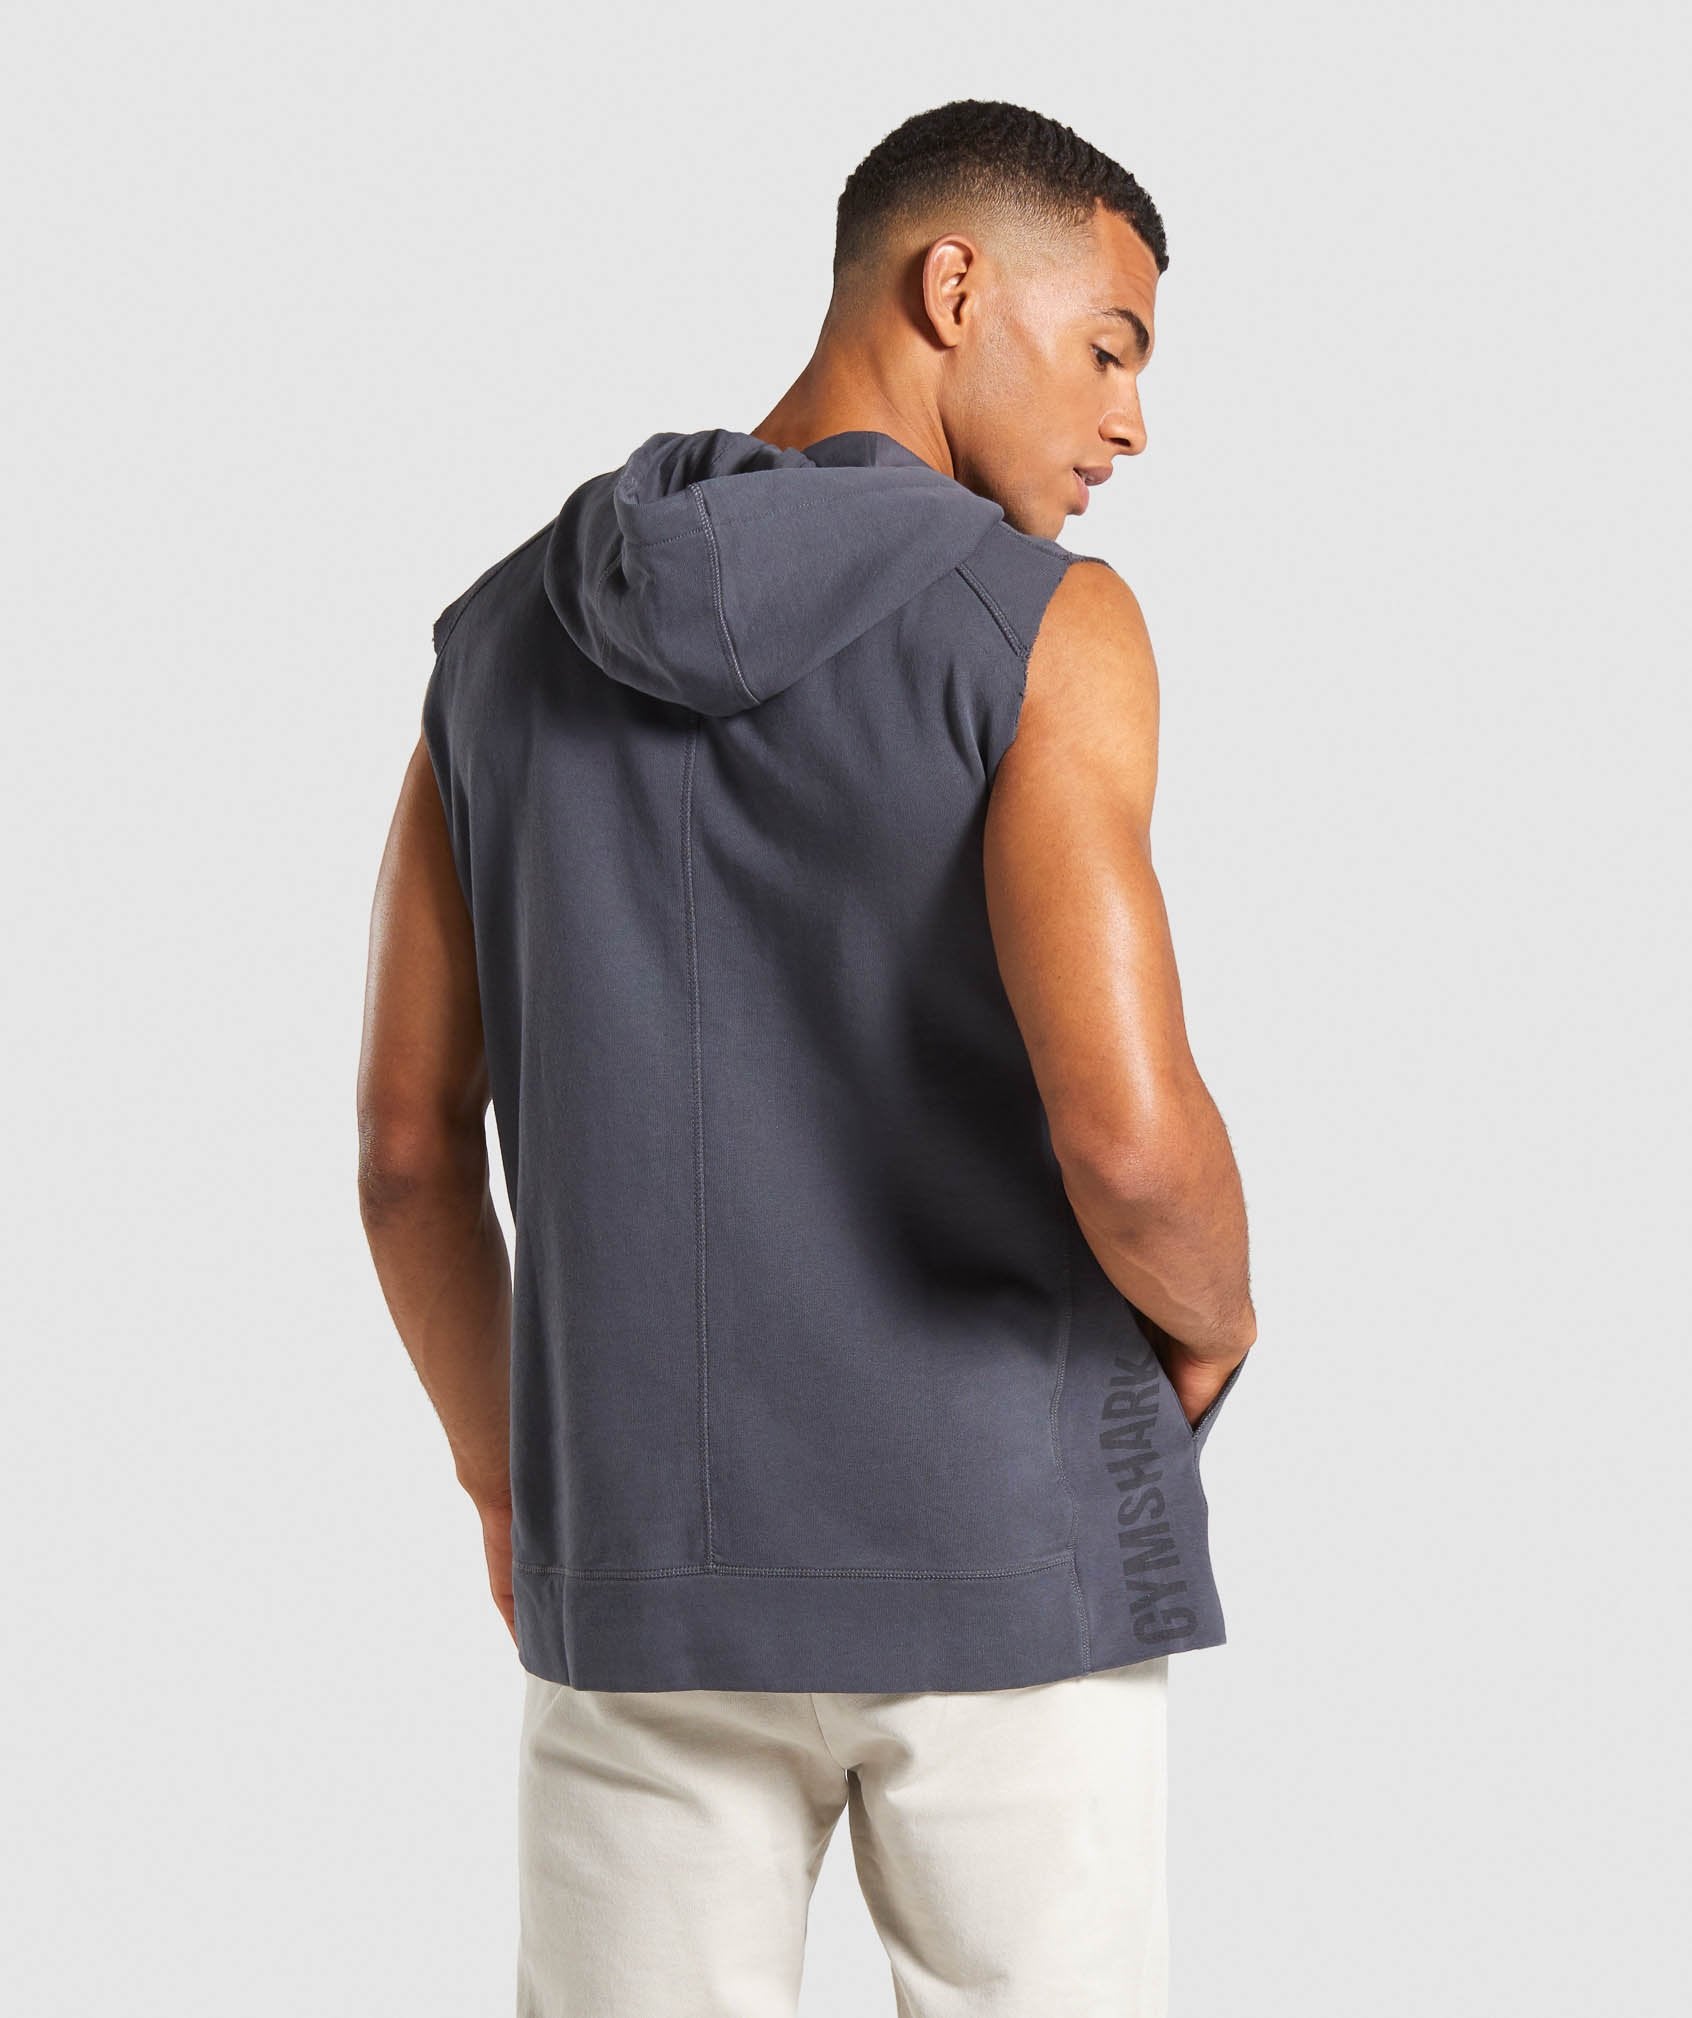 Laundered Sleeveless Hoodie in Charcoal - view 2